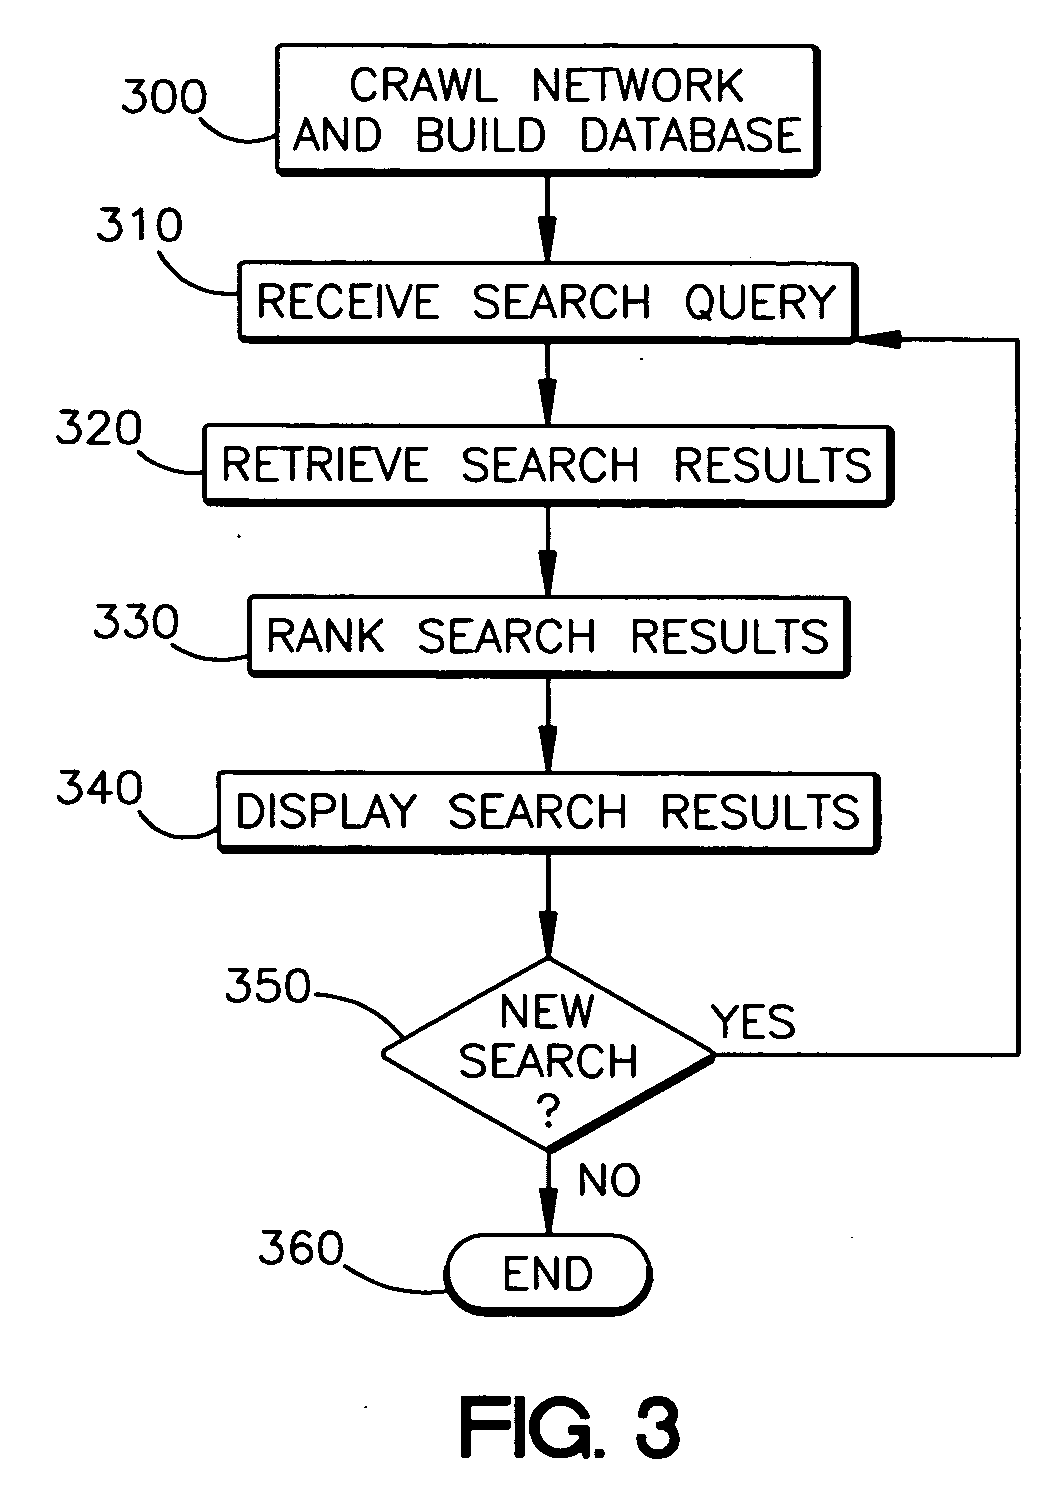 Ranking results for network search query